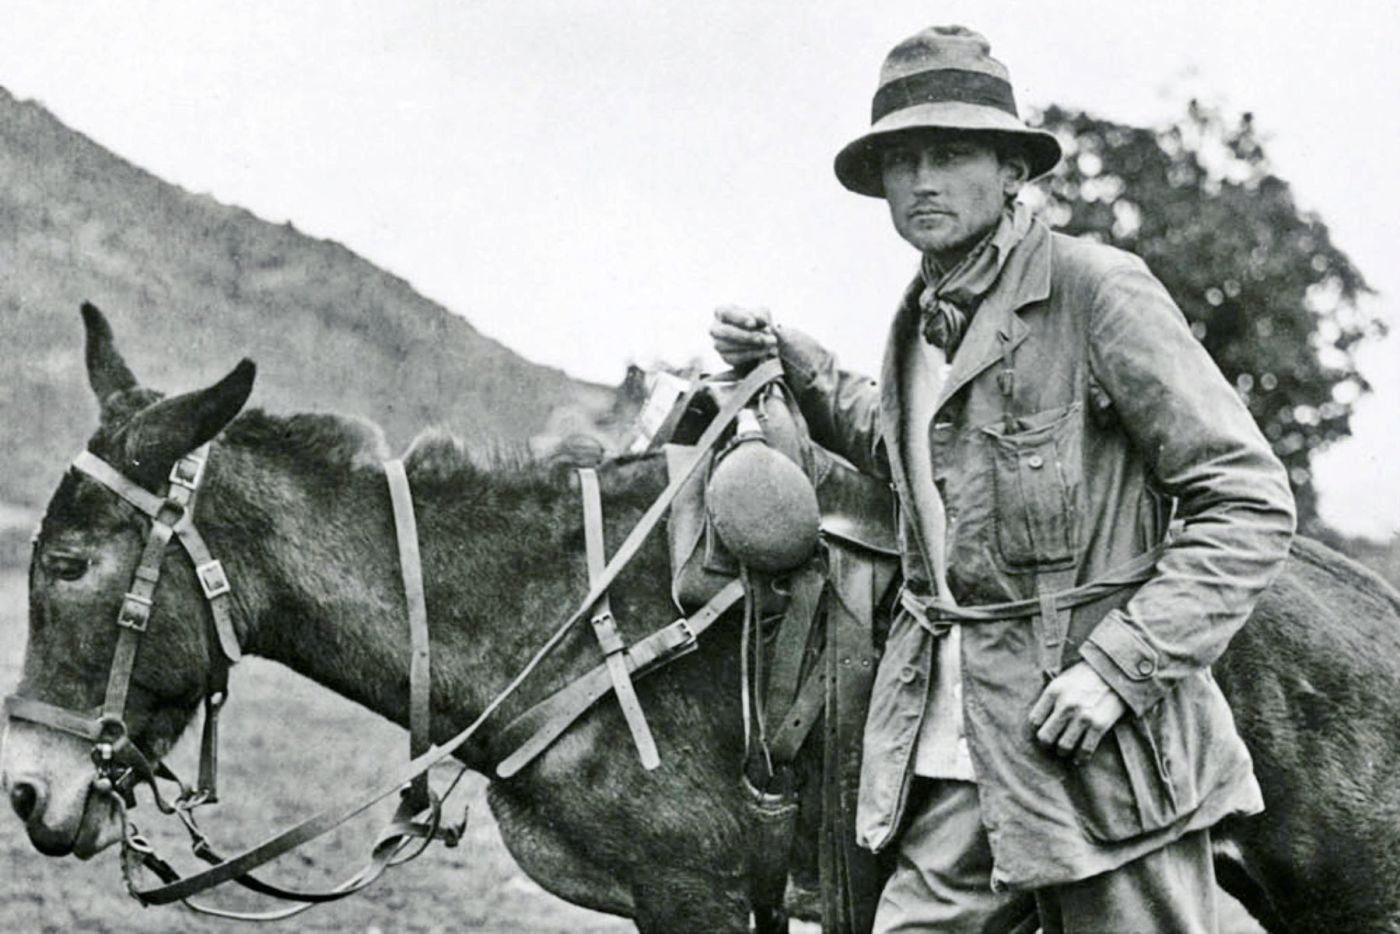 The most famous explorer of Machu Picchu is Hiram Bingham, but others had come before.